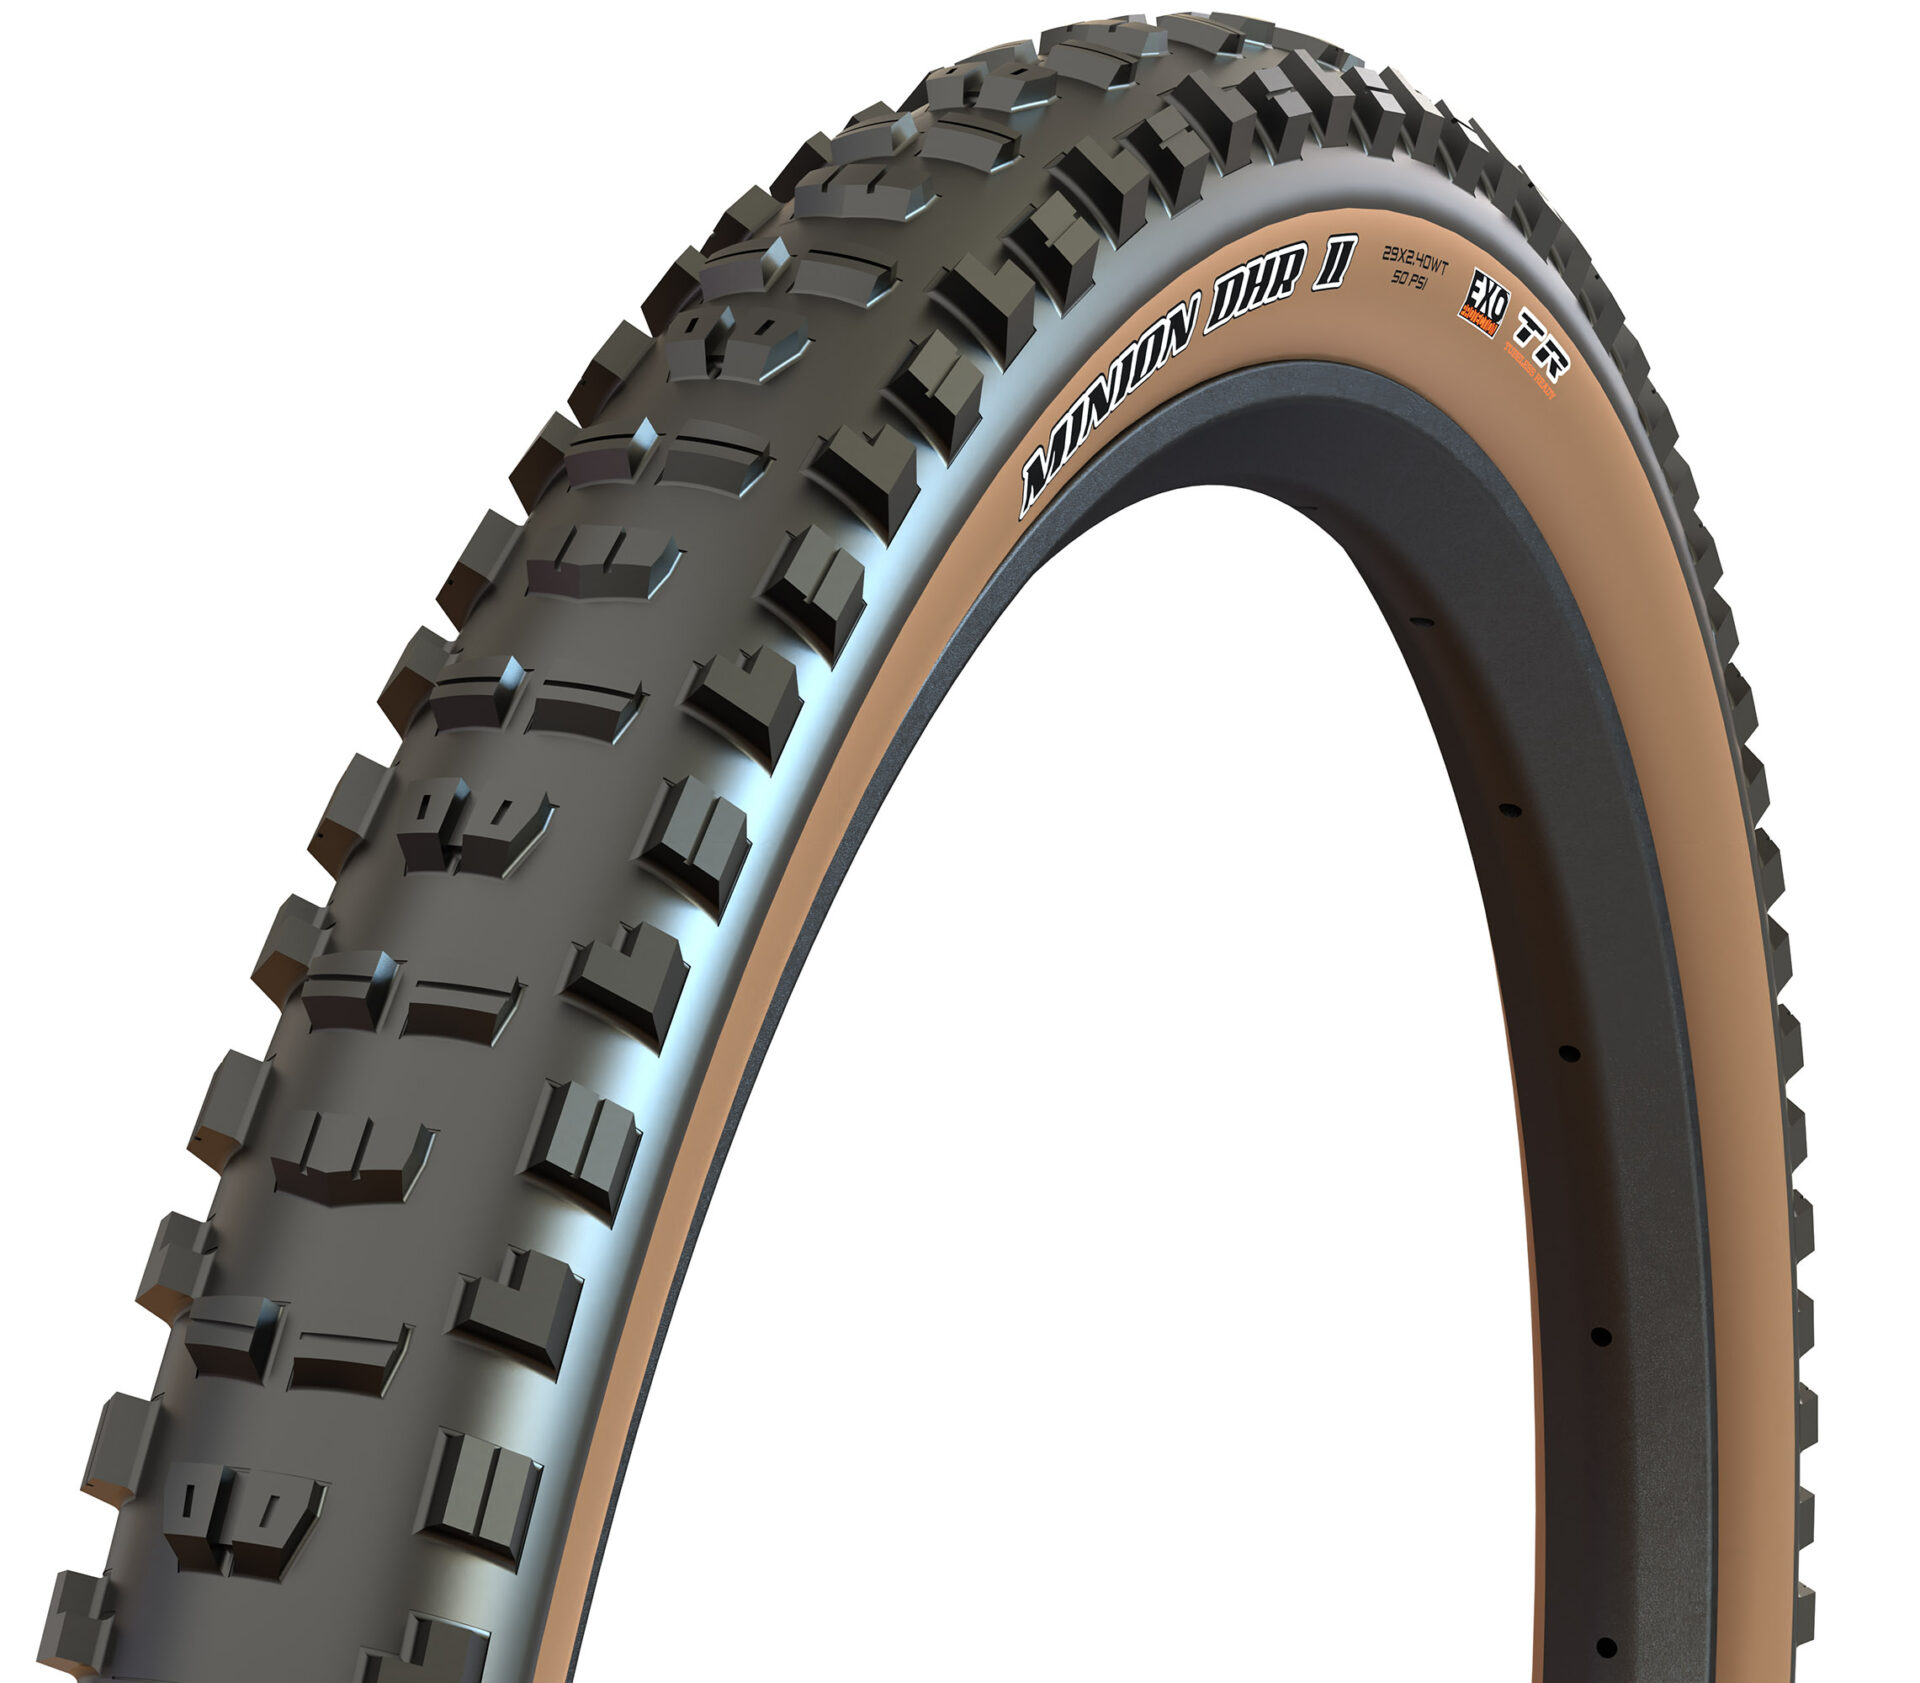 Maxxis Minion DHF tire construction and design features